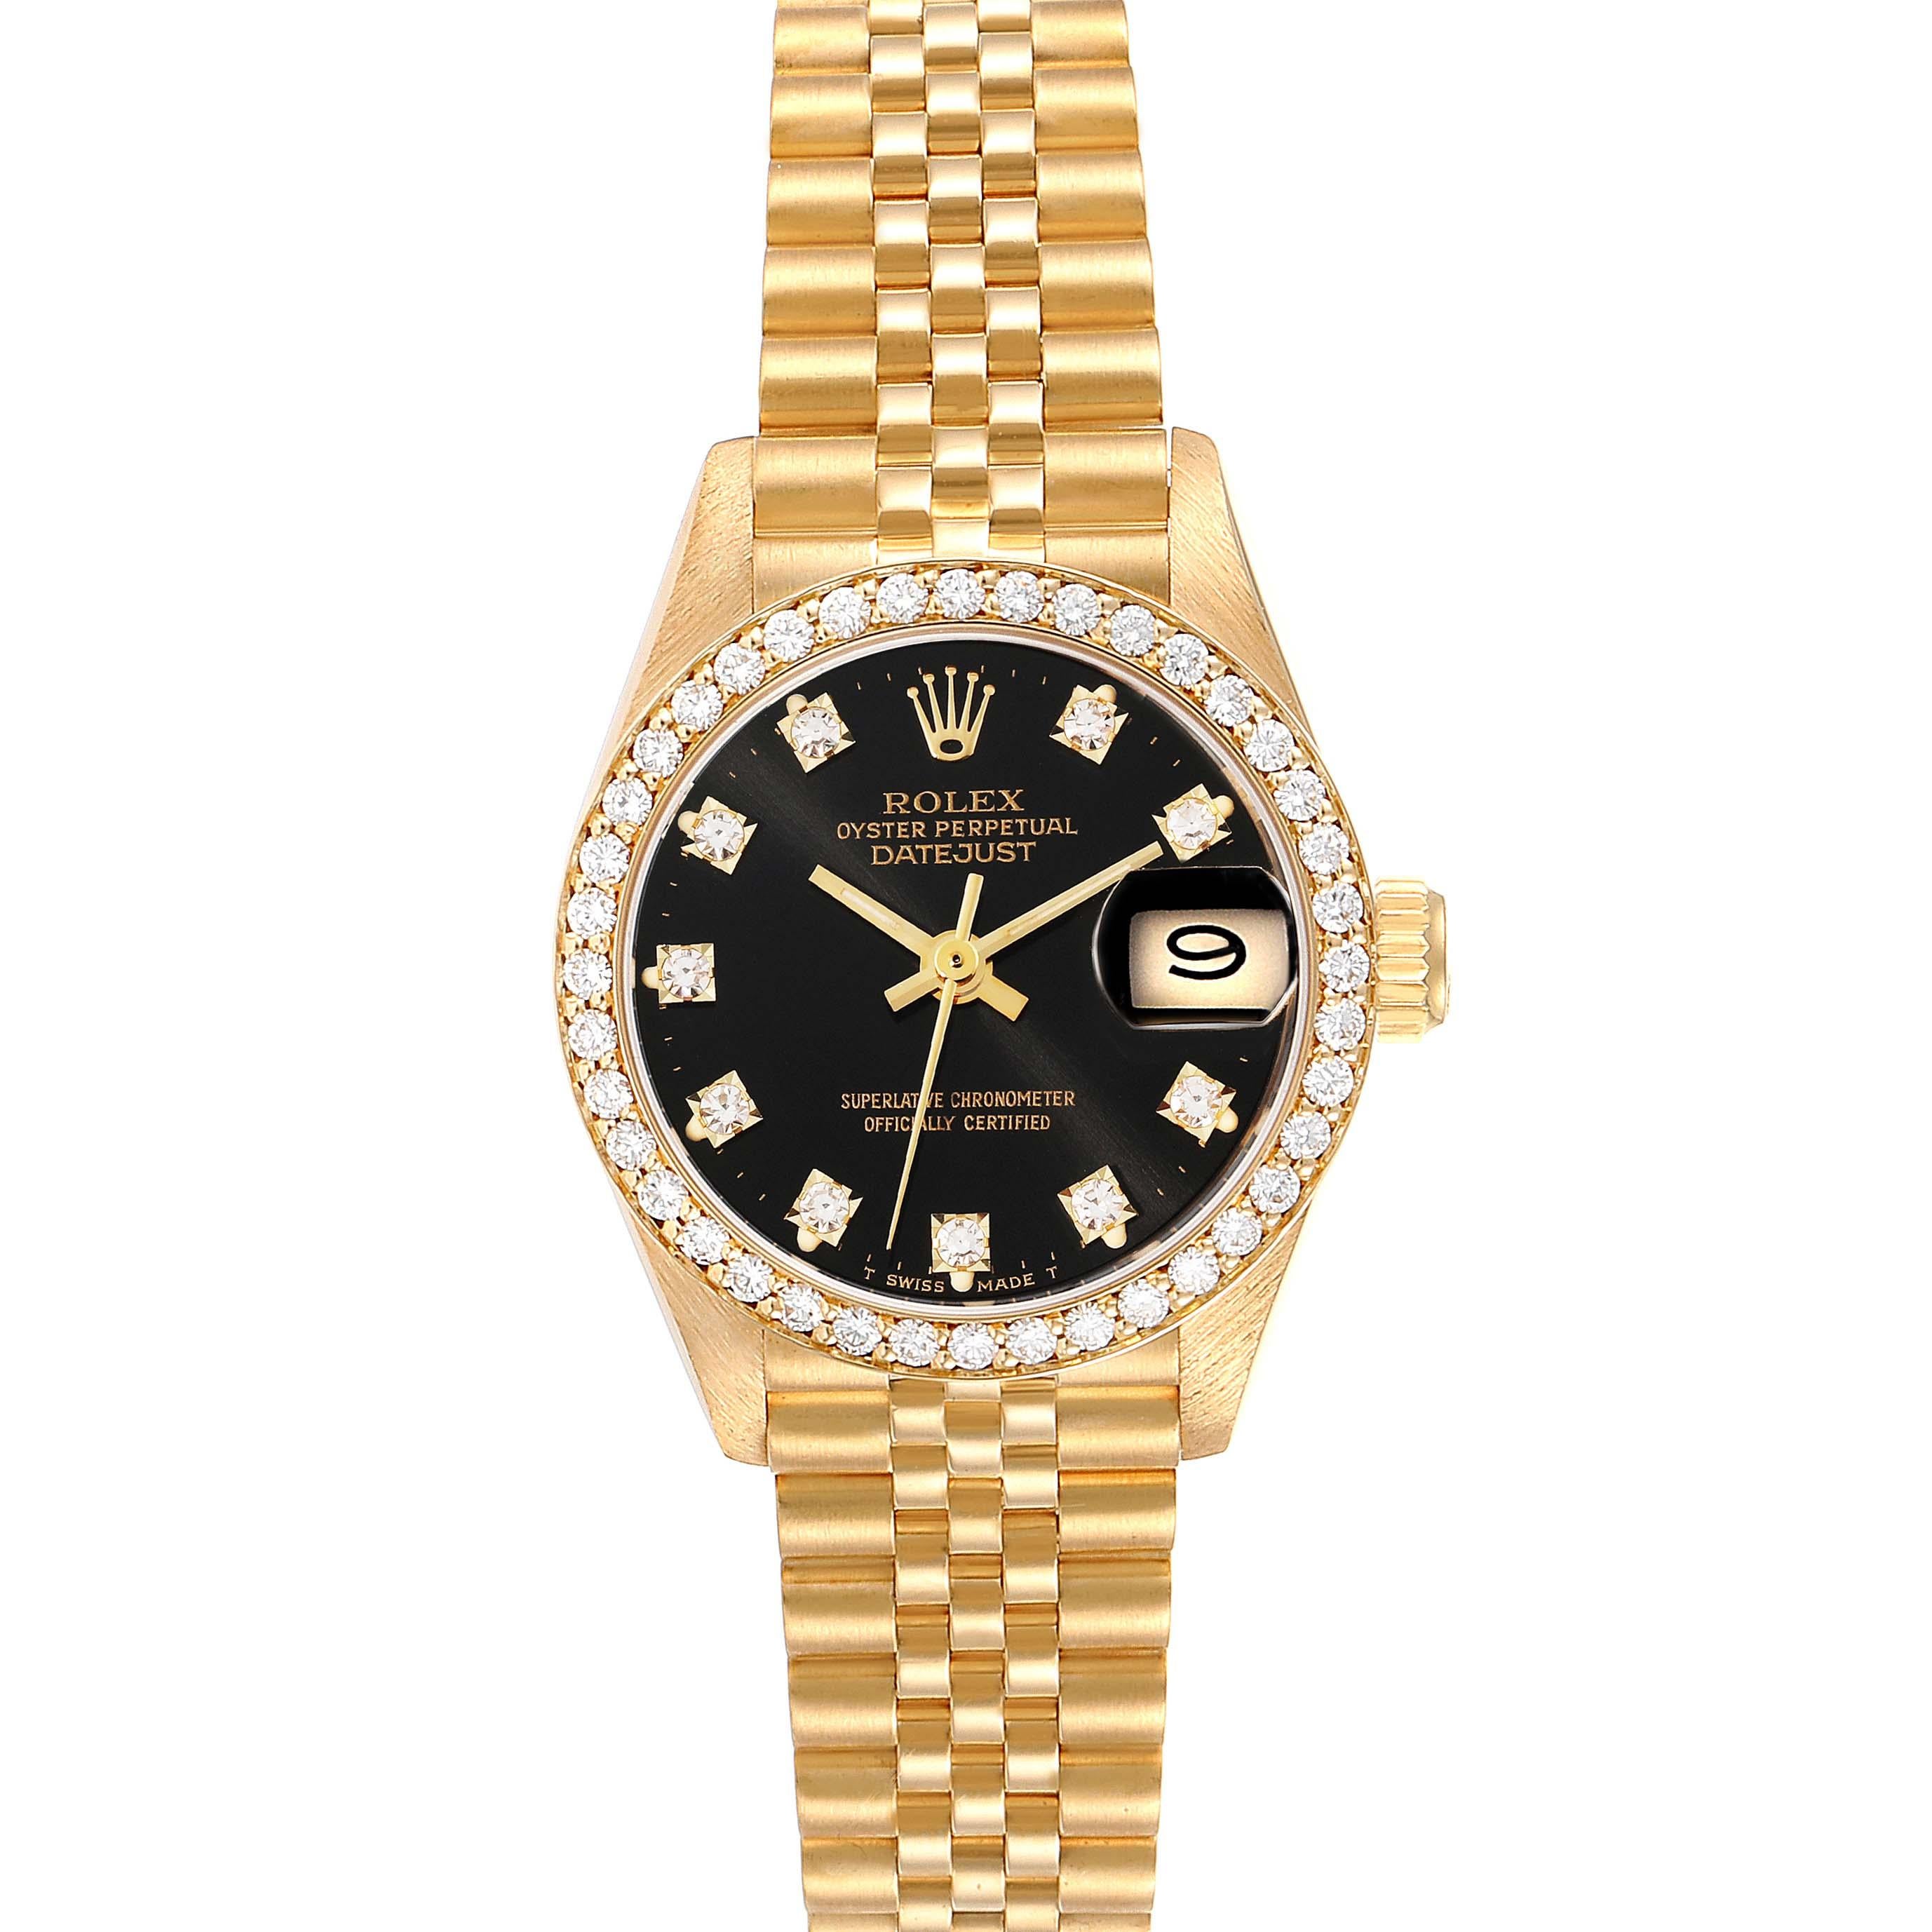 Rolex Datejust President Yellow Gold Diamond Ladies Watch 69138 Box Papers. Officially certified chronometer automatic self-winding movement. 18k yellow gold oyster case 26.0 mm in diameter. Rolex logo on the crown. Original Rolex factory diamond